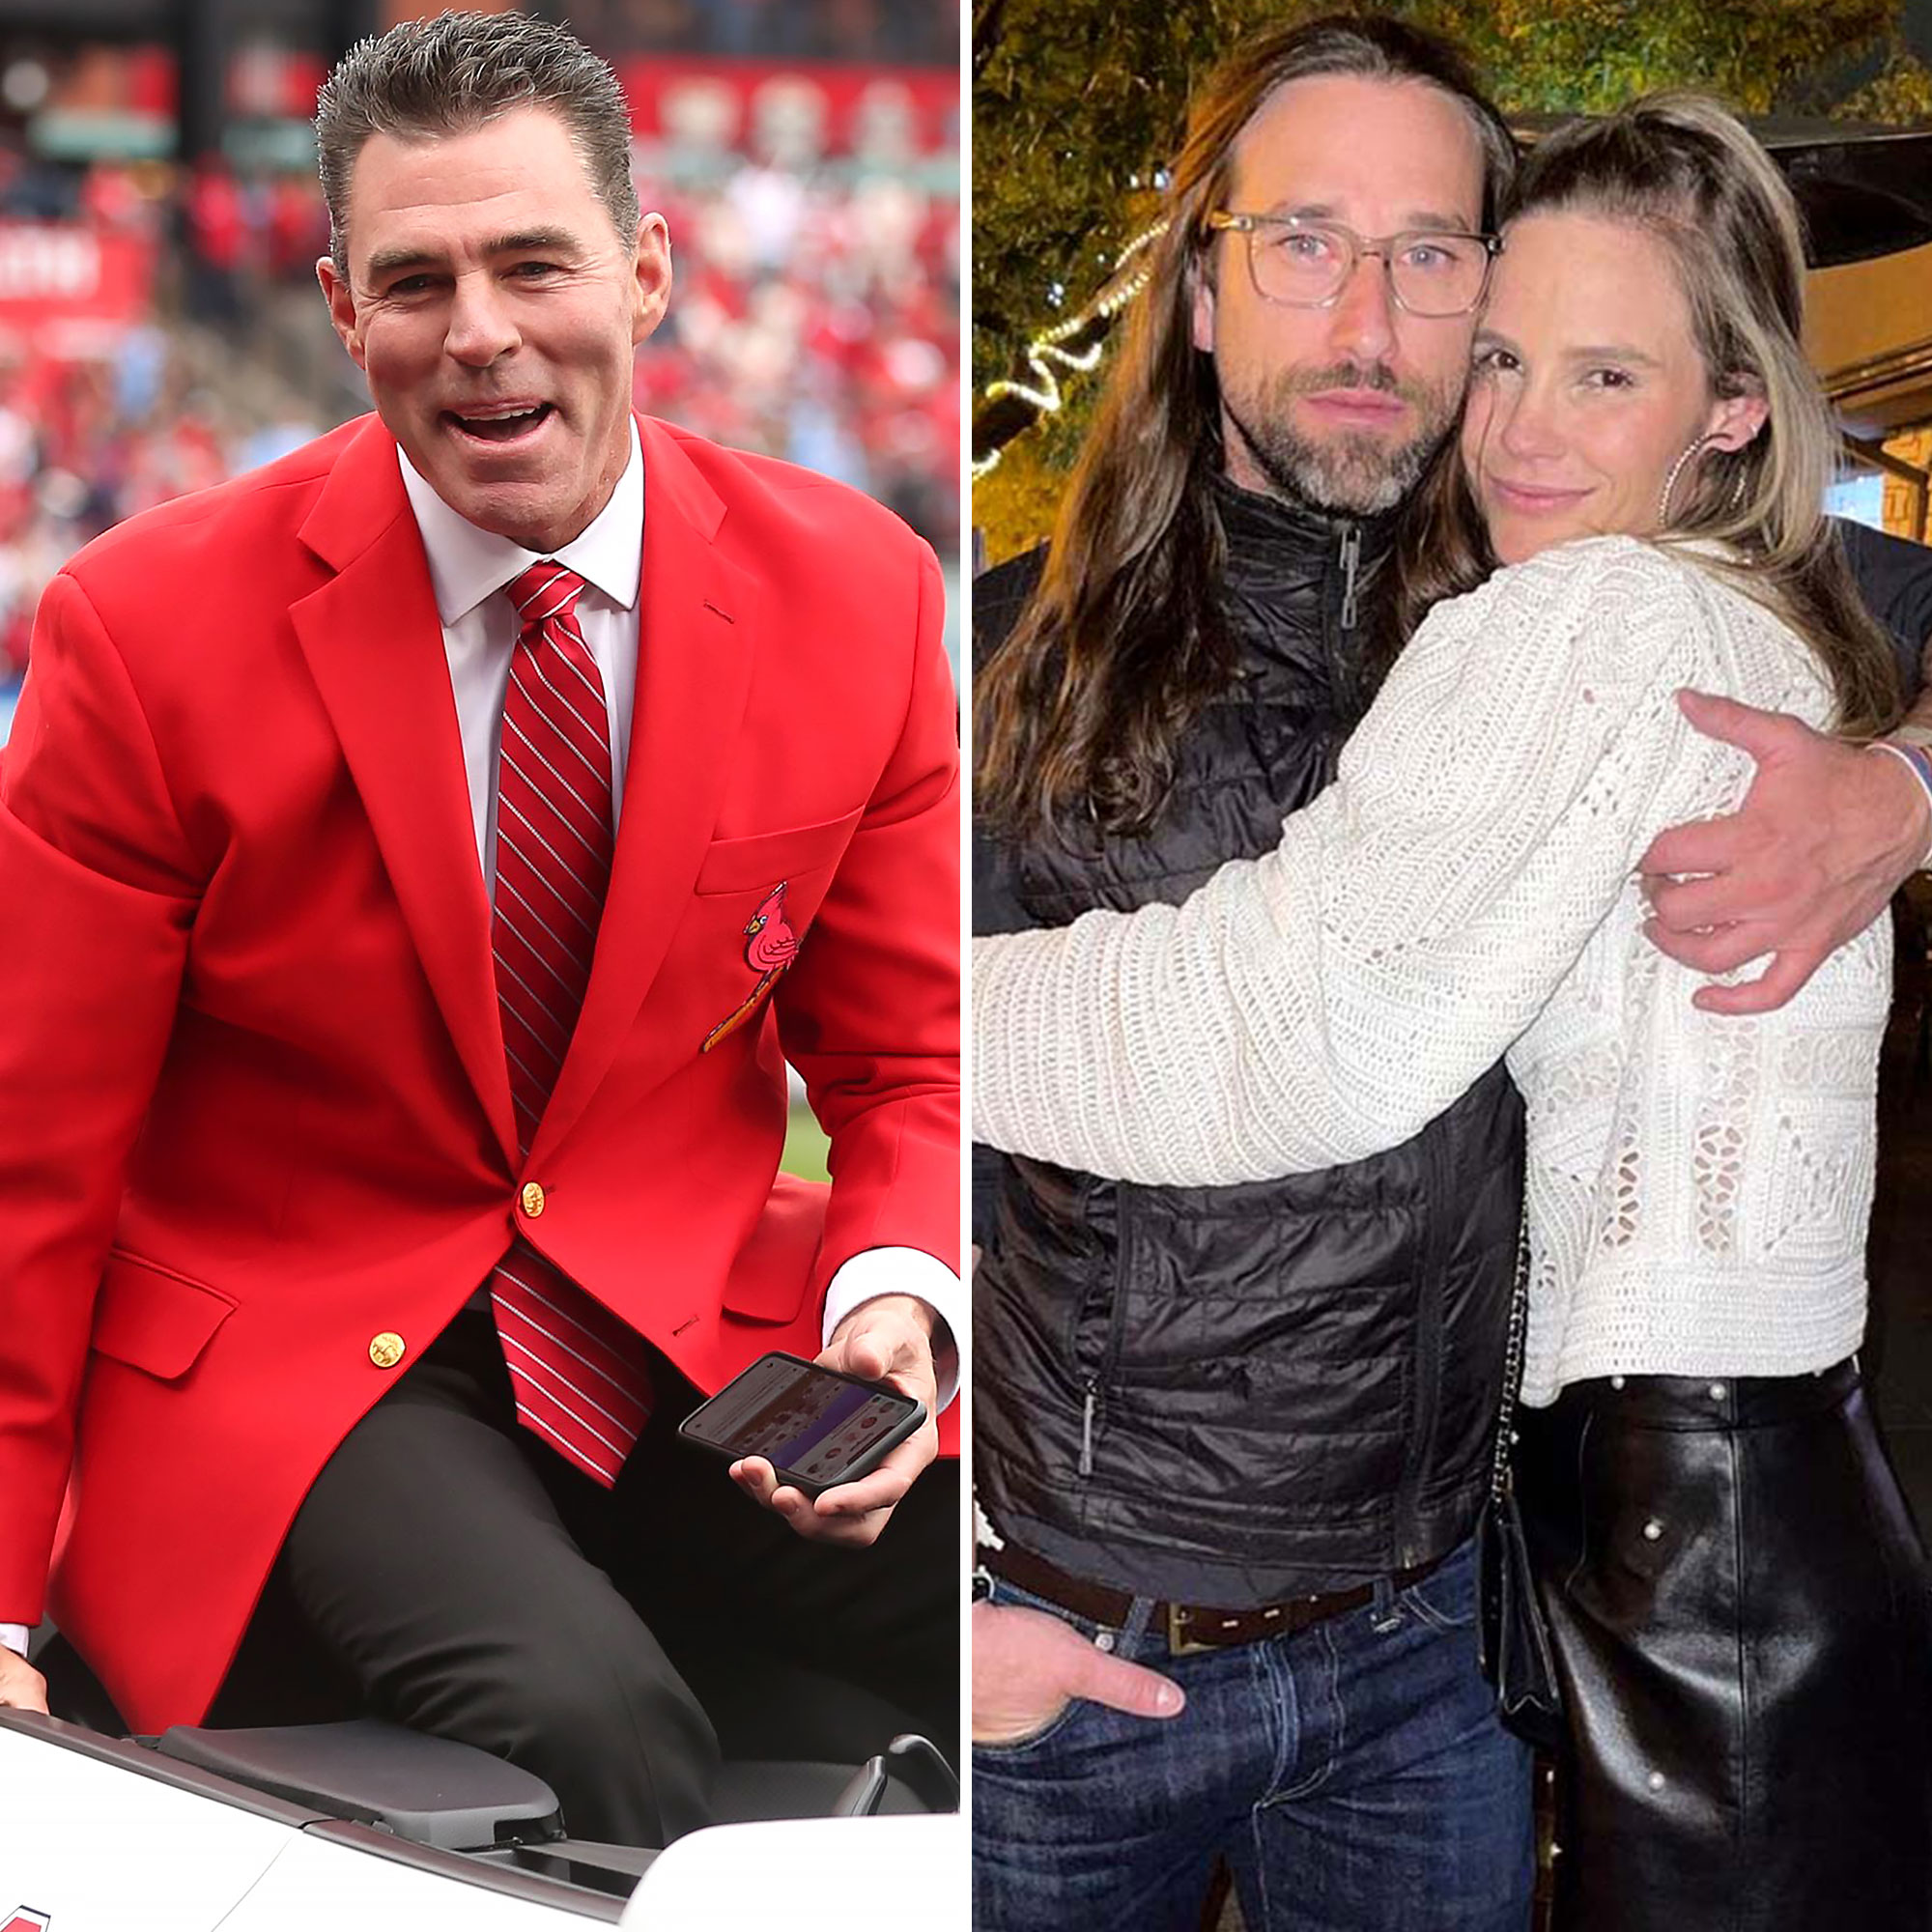 Jim Edmonds Reacts to Meghan King and Cuffe Owens Wedding pic